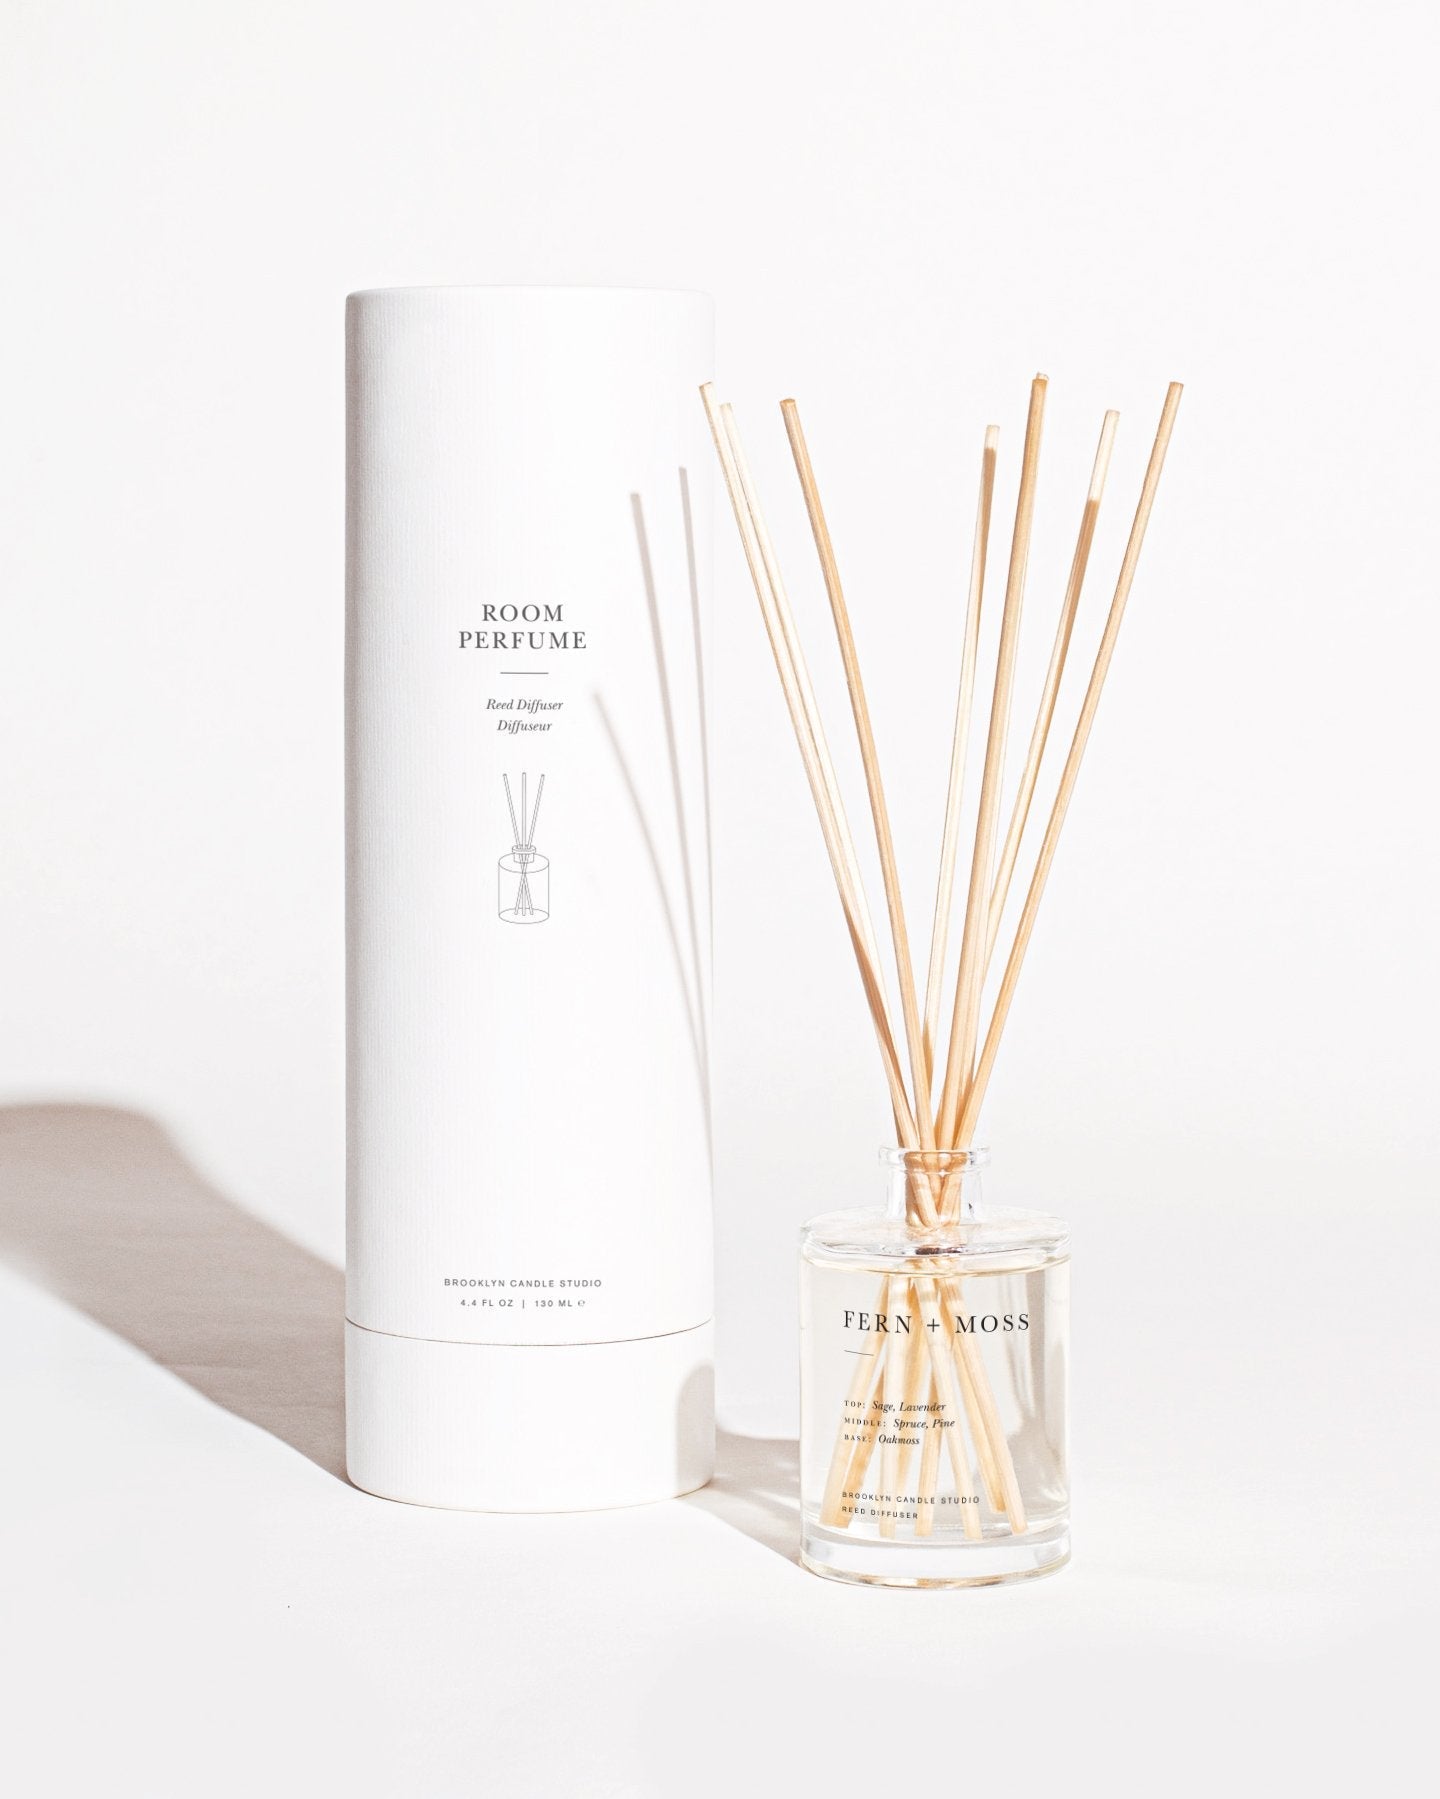 A clear glass bottle of Fern + Moss Reed Diffuser by Brooklyn Candle Studio with several natural-colored reeds sticking out of it. The botanical aroma infuses the space, and the bottle is placed next to a tall white cylindrical box labeled "Room Perfume" on a white background.